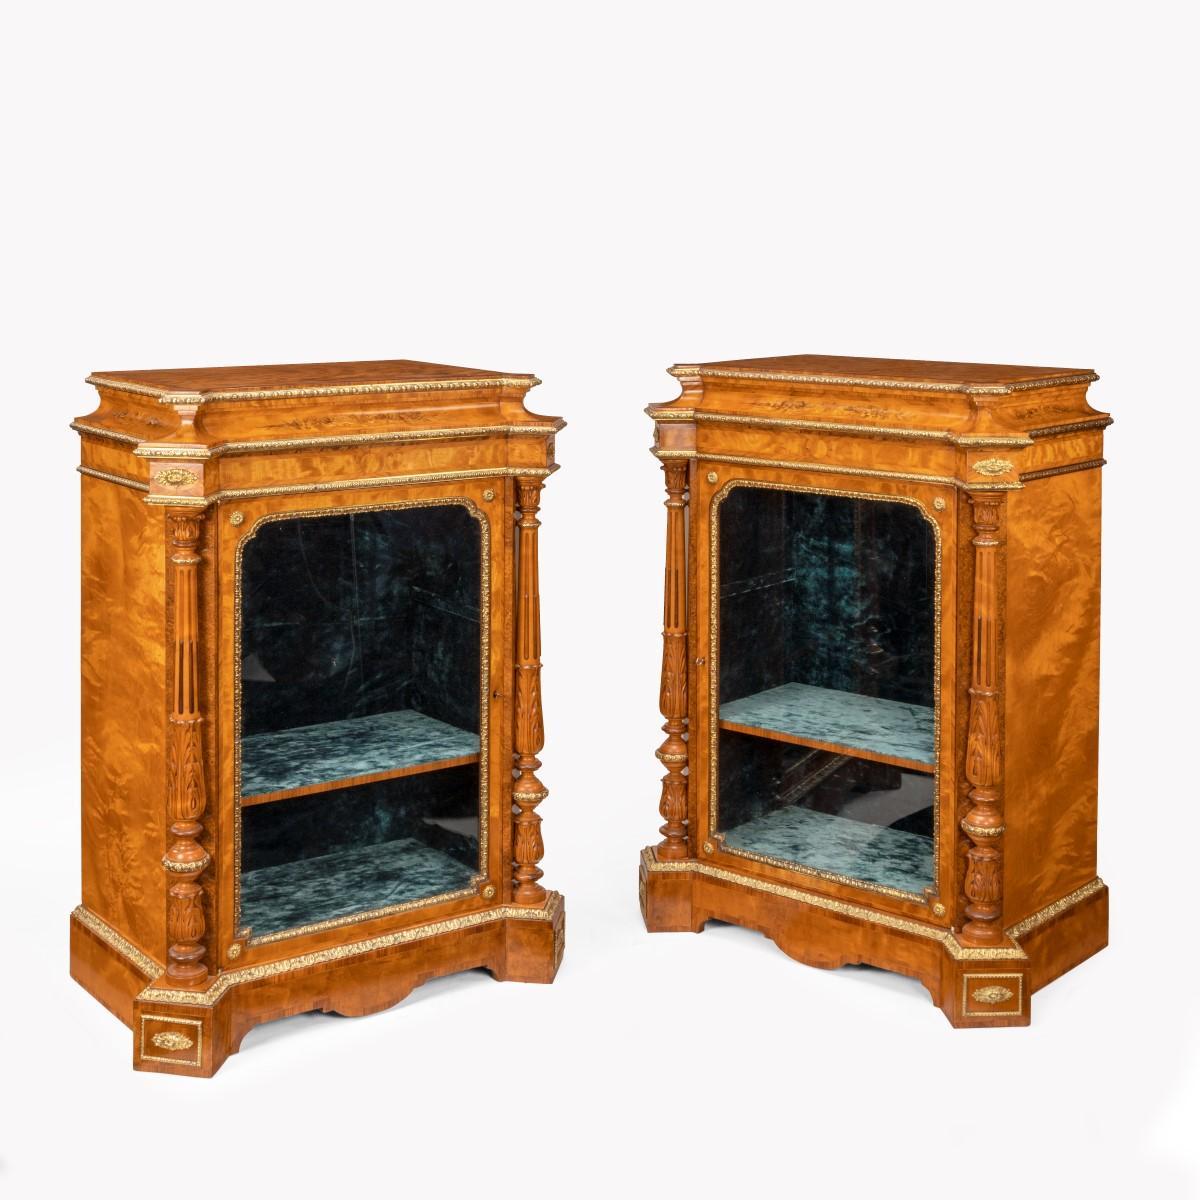 A pair of Victorian satinwood display cabinets attributed to Holland and Sons, each of stepped, rectangular form with protruding square-cut corners holding turned stop-fluted and acanthus-carved pillars, with a central glazed door opening left- and